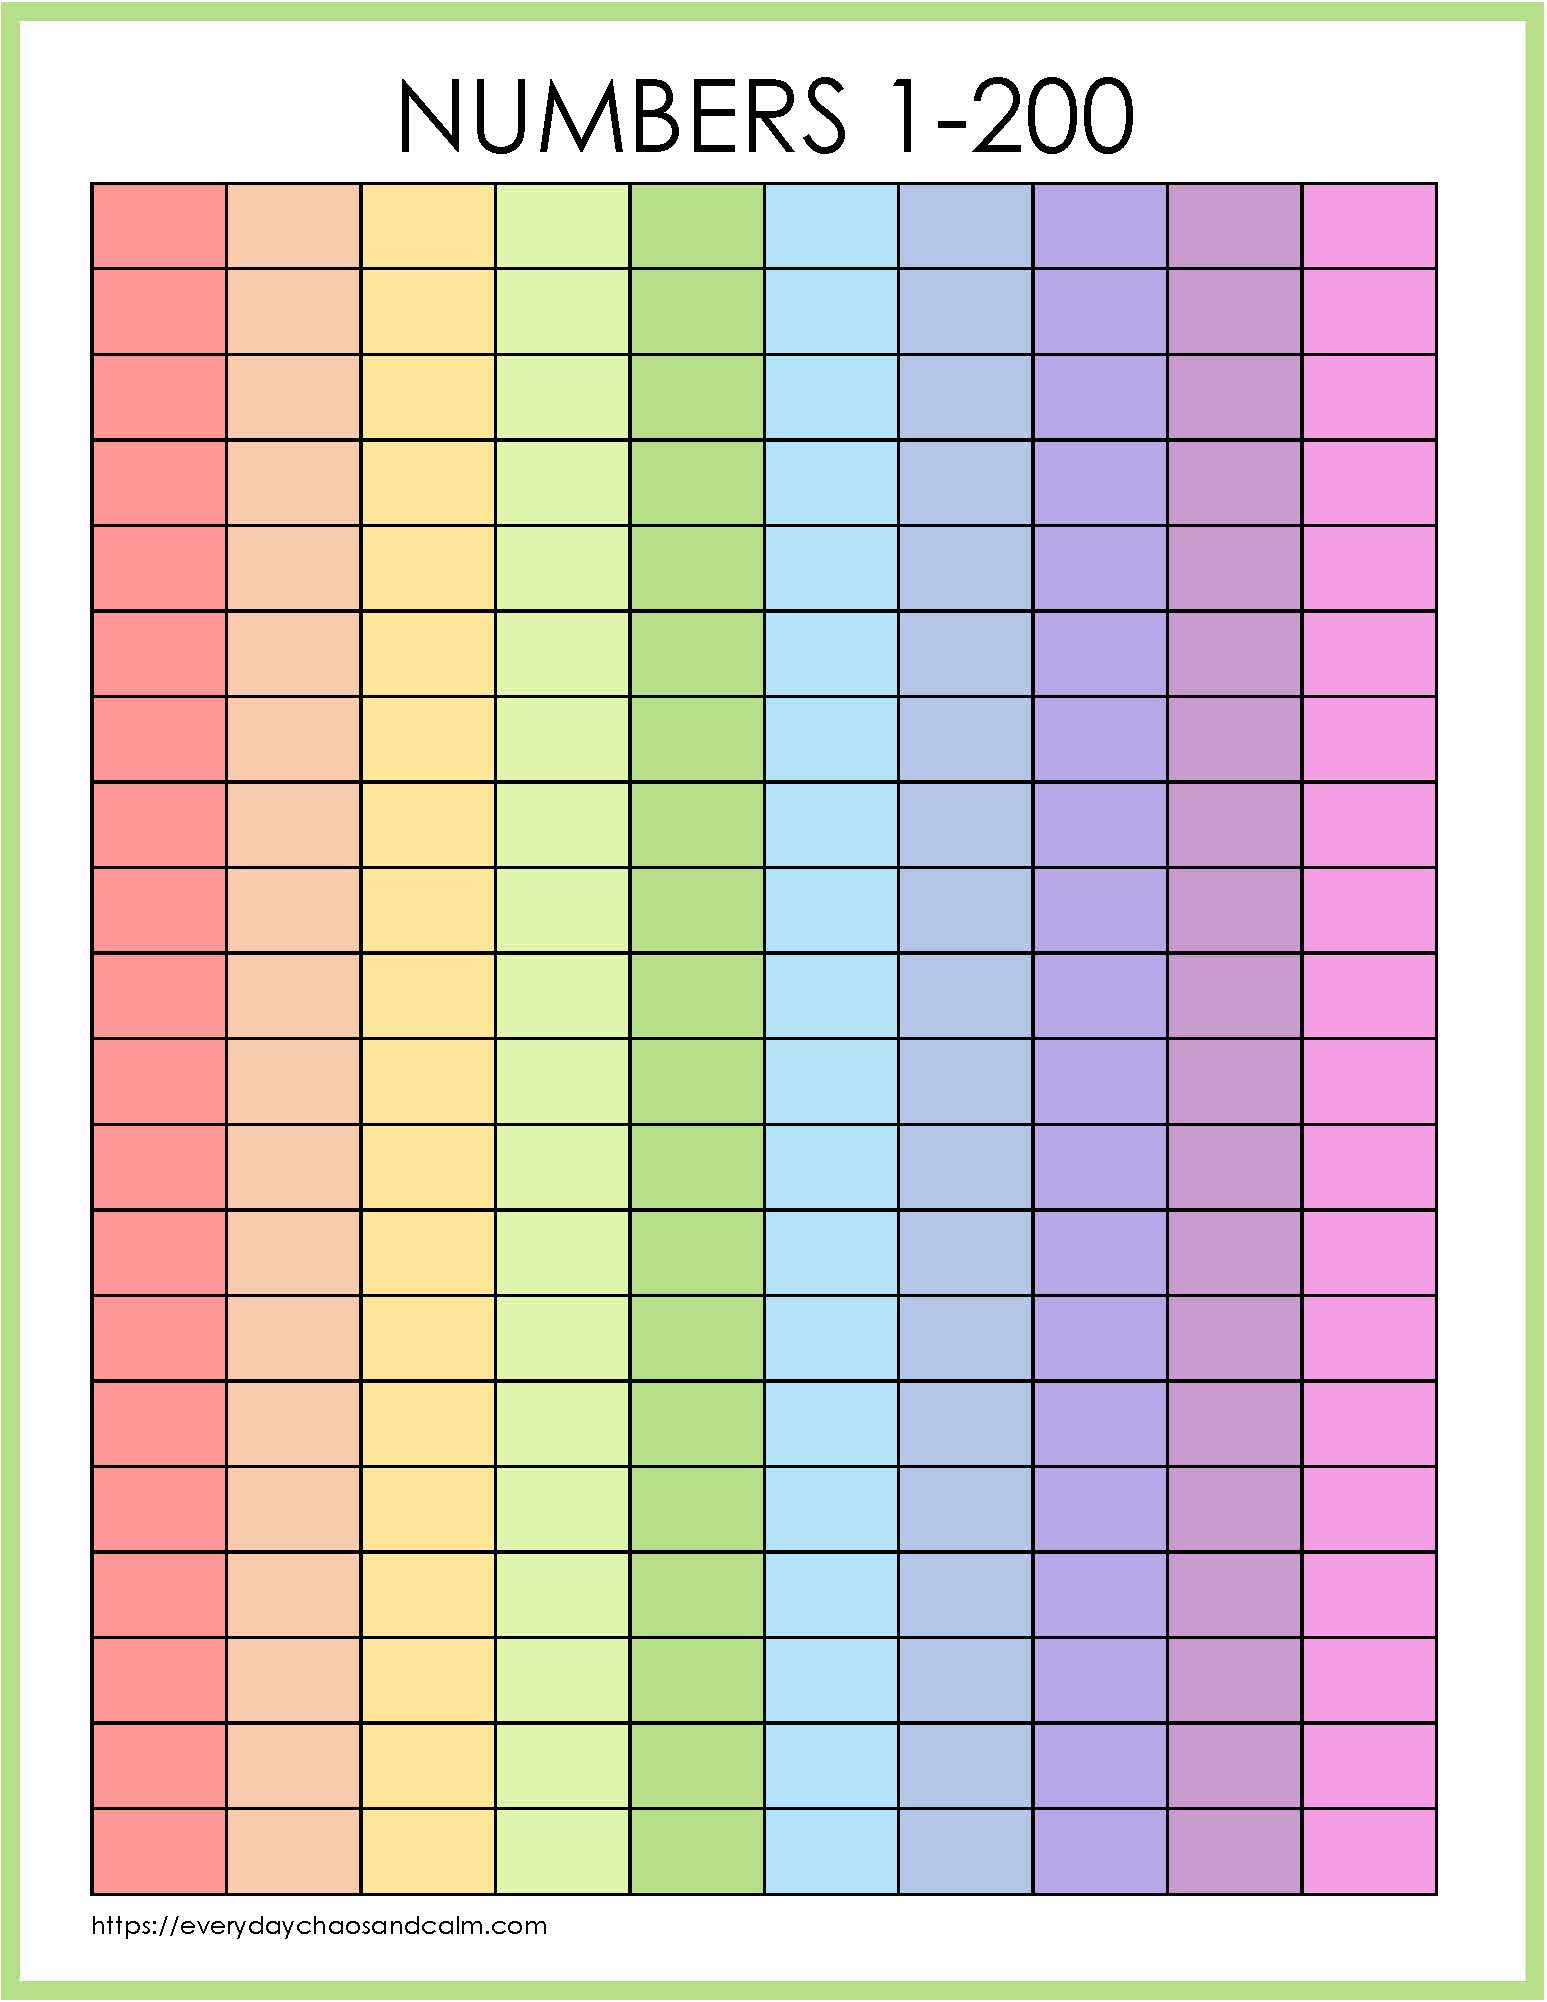 blank 1-200 number Chart with colored lines for each number